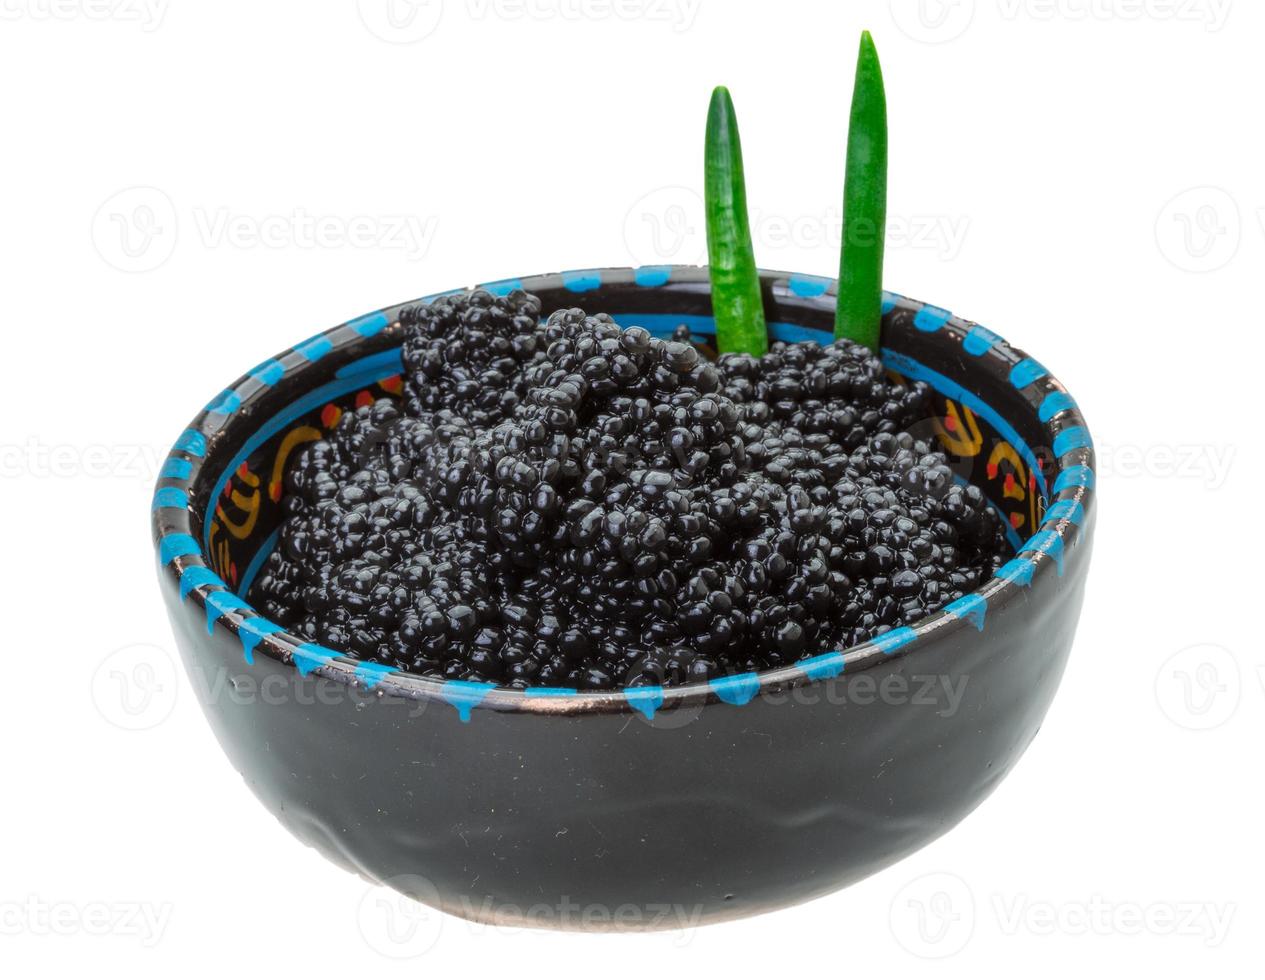 Black caviar in a bowl on white background photo